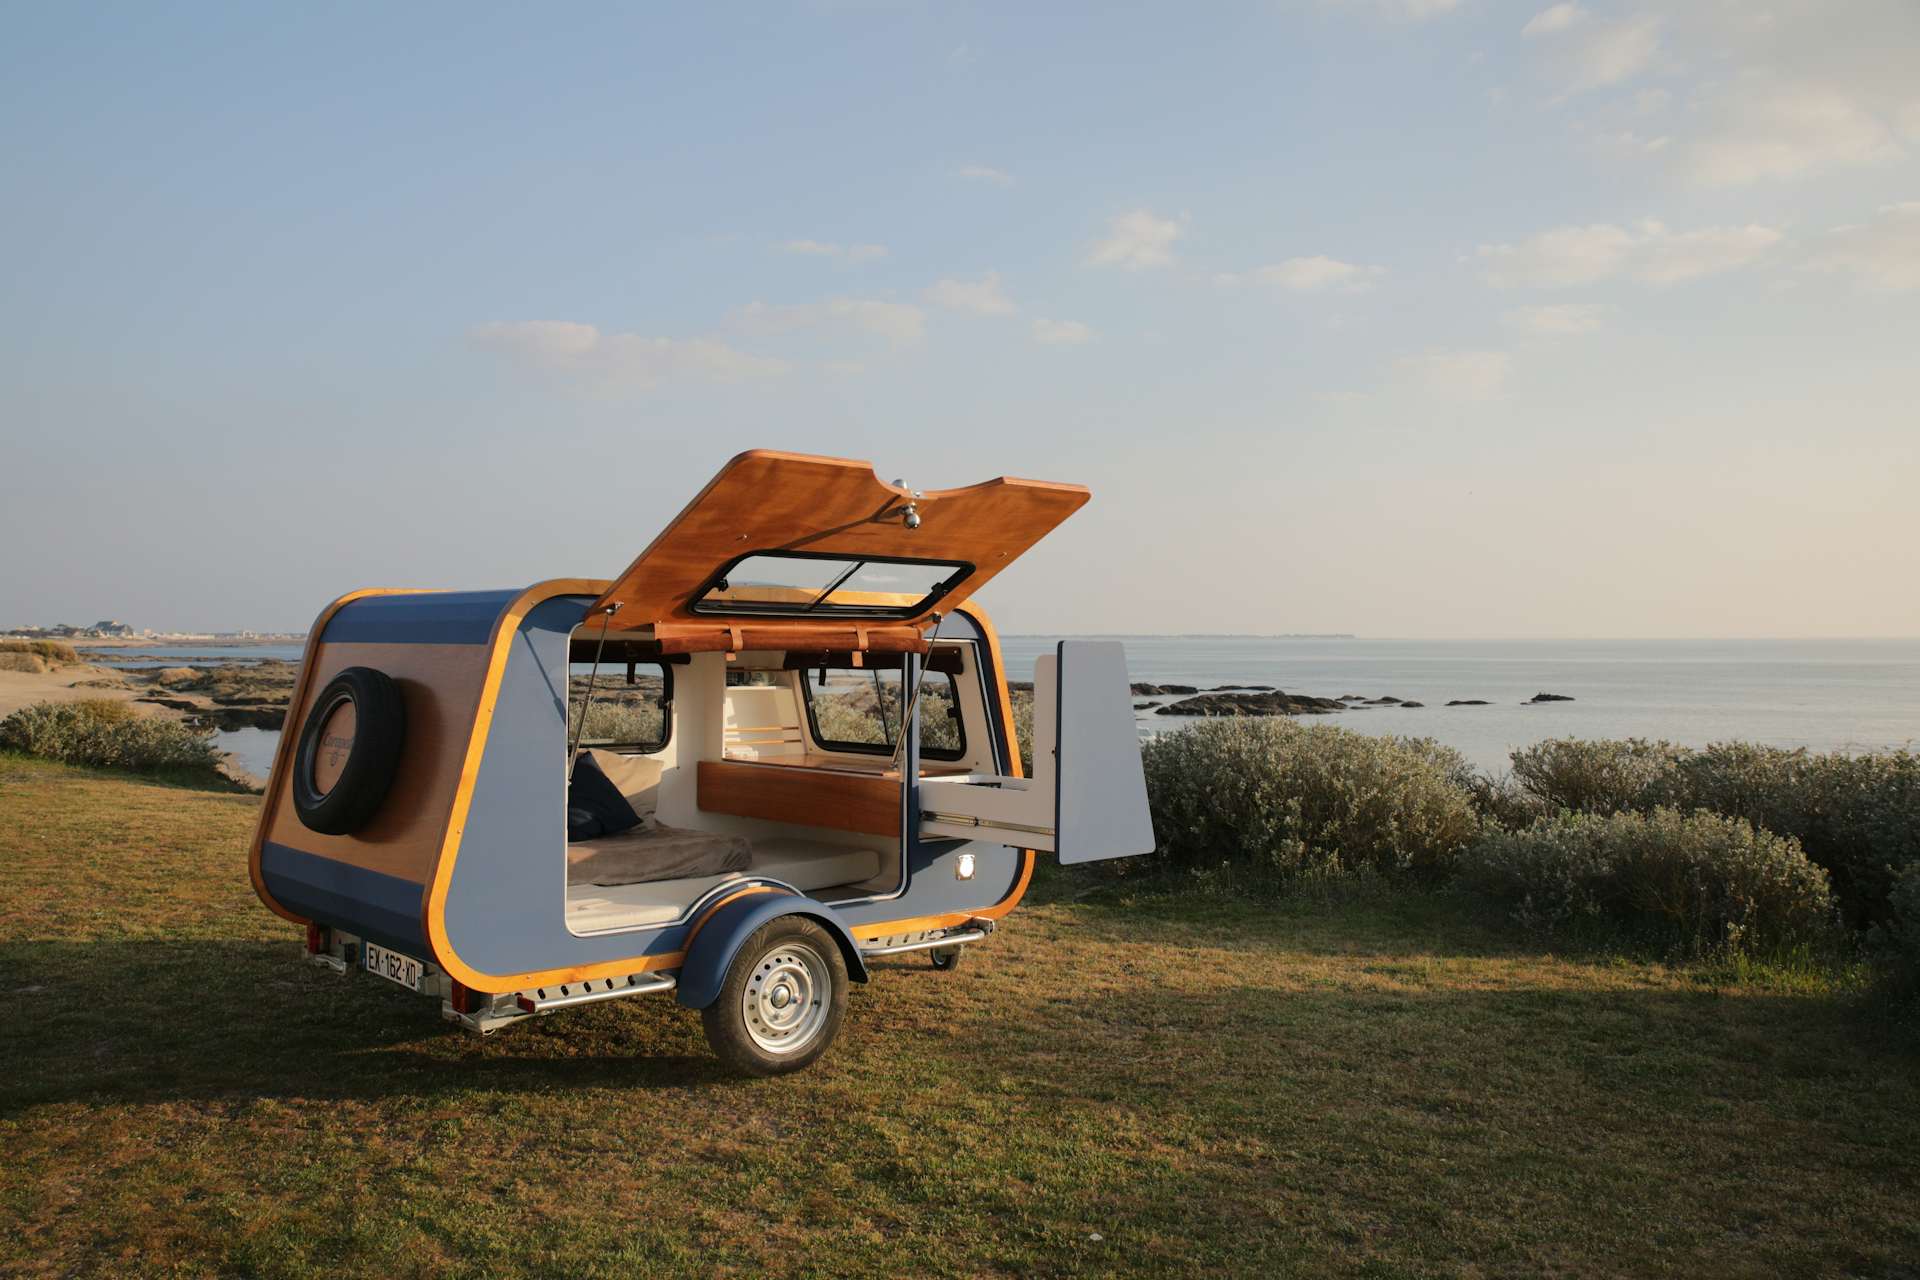 A Brand-New French Caravan Company Just Released Two Dreamy Campers - Dwell